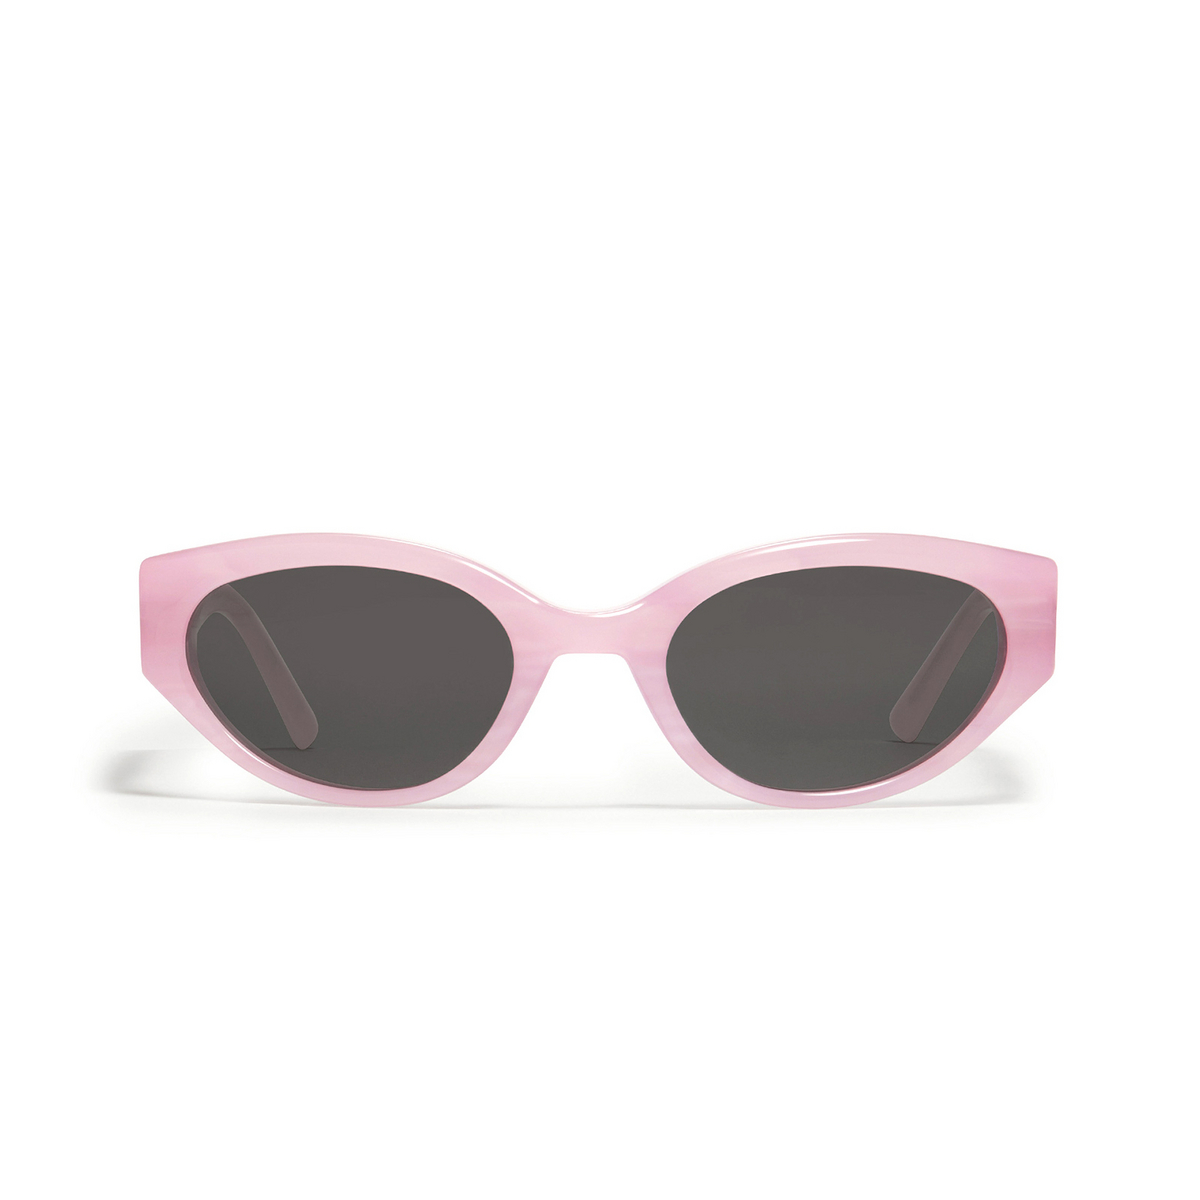 Gentle Monster® Cat-eye Sunglasses: Molto color Pink P1 - front view.